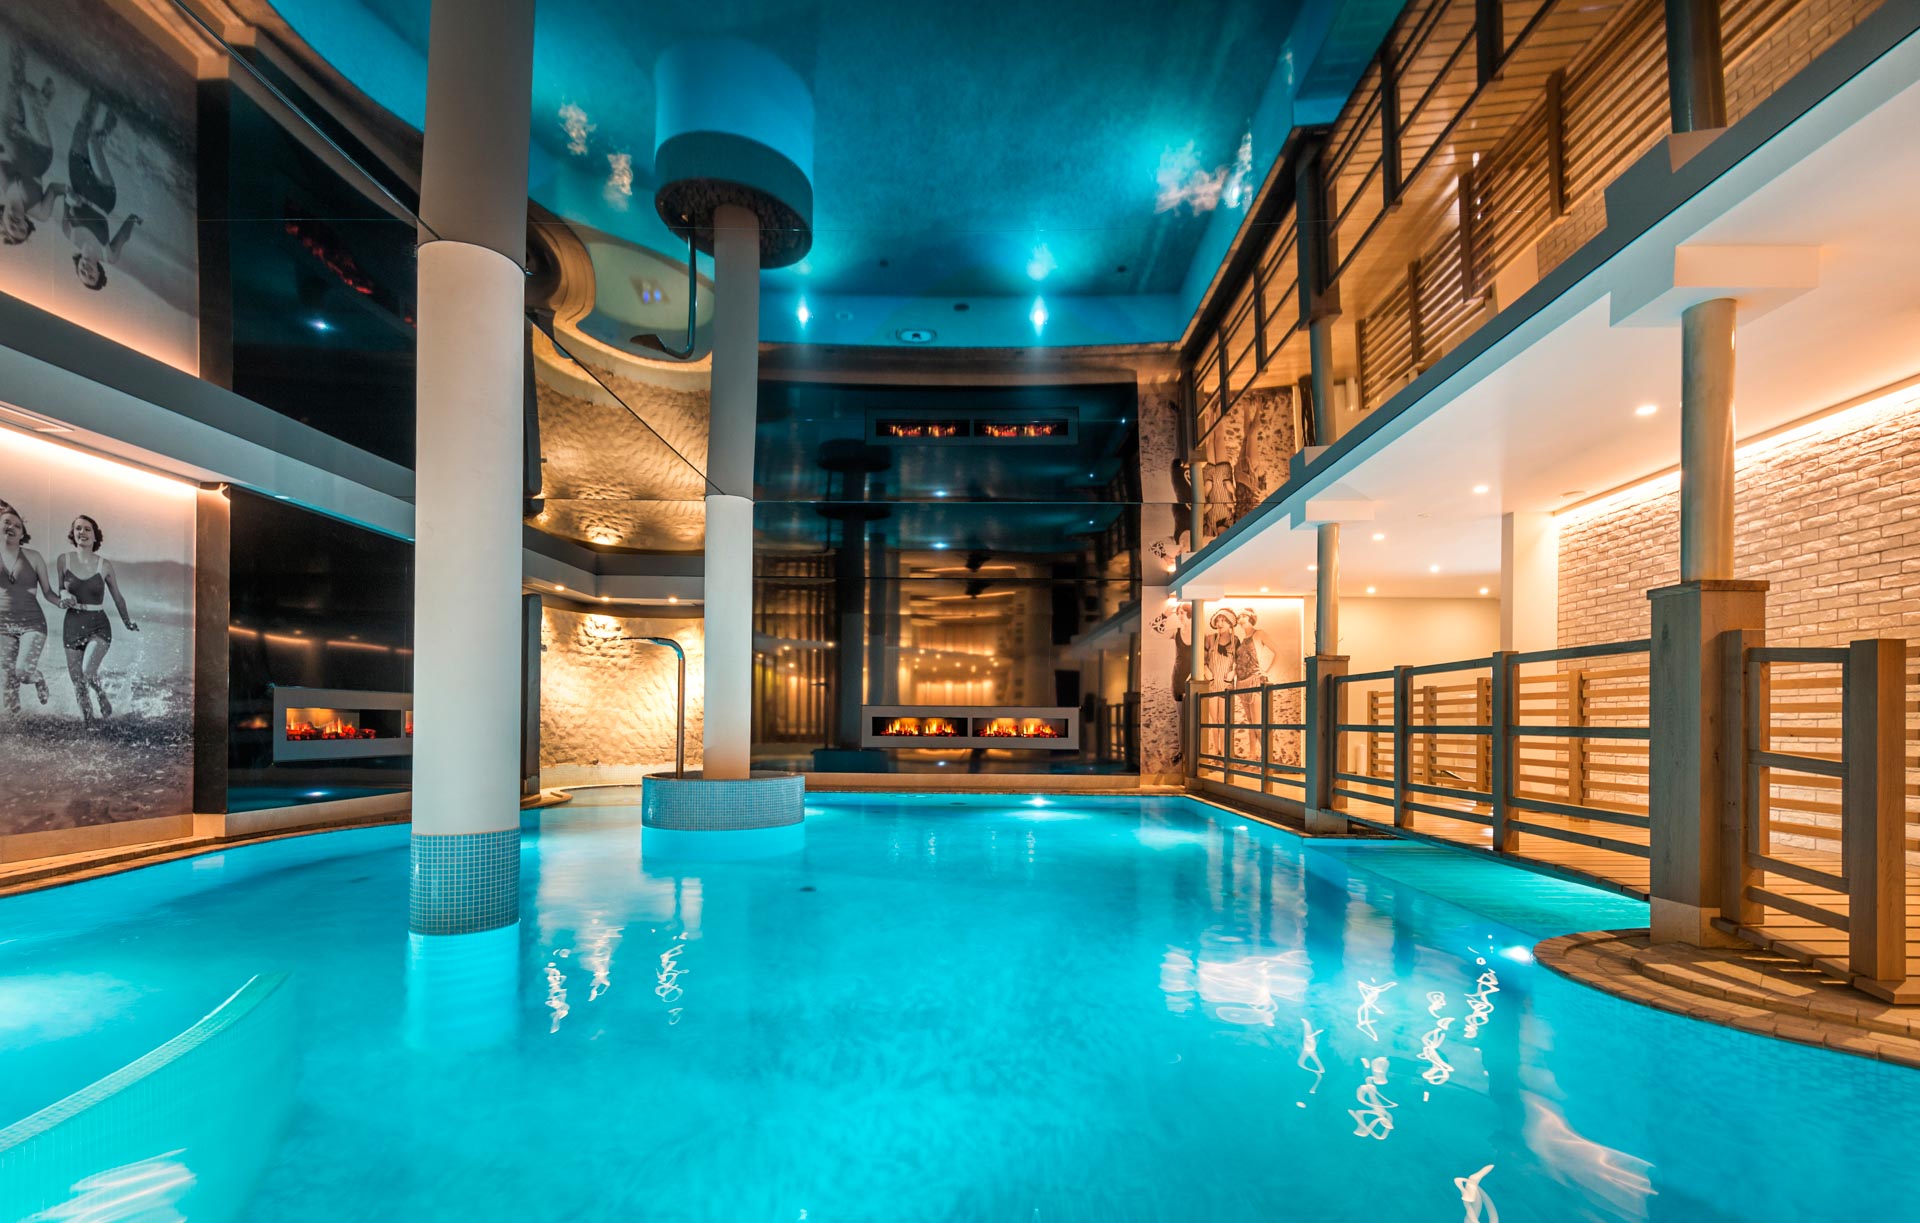 Indoor Thermal Water Pool - The 50th